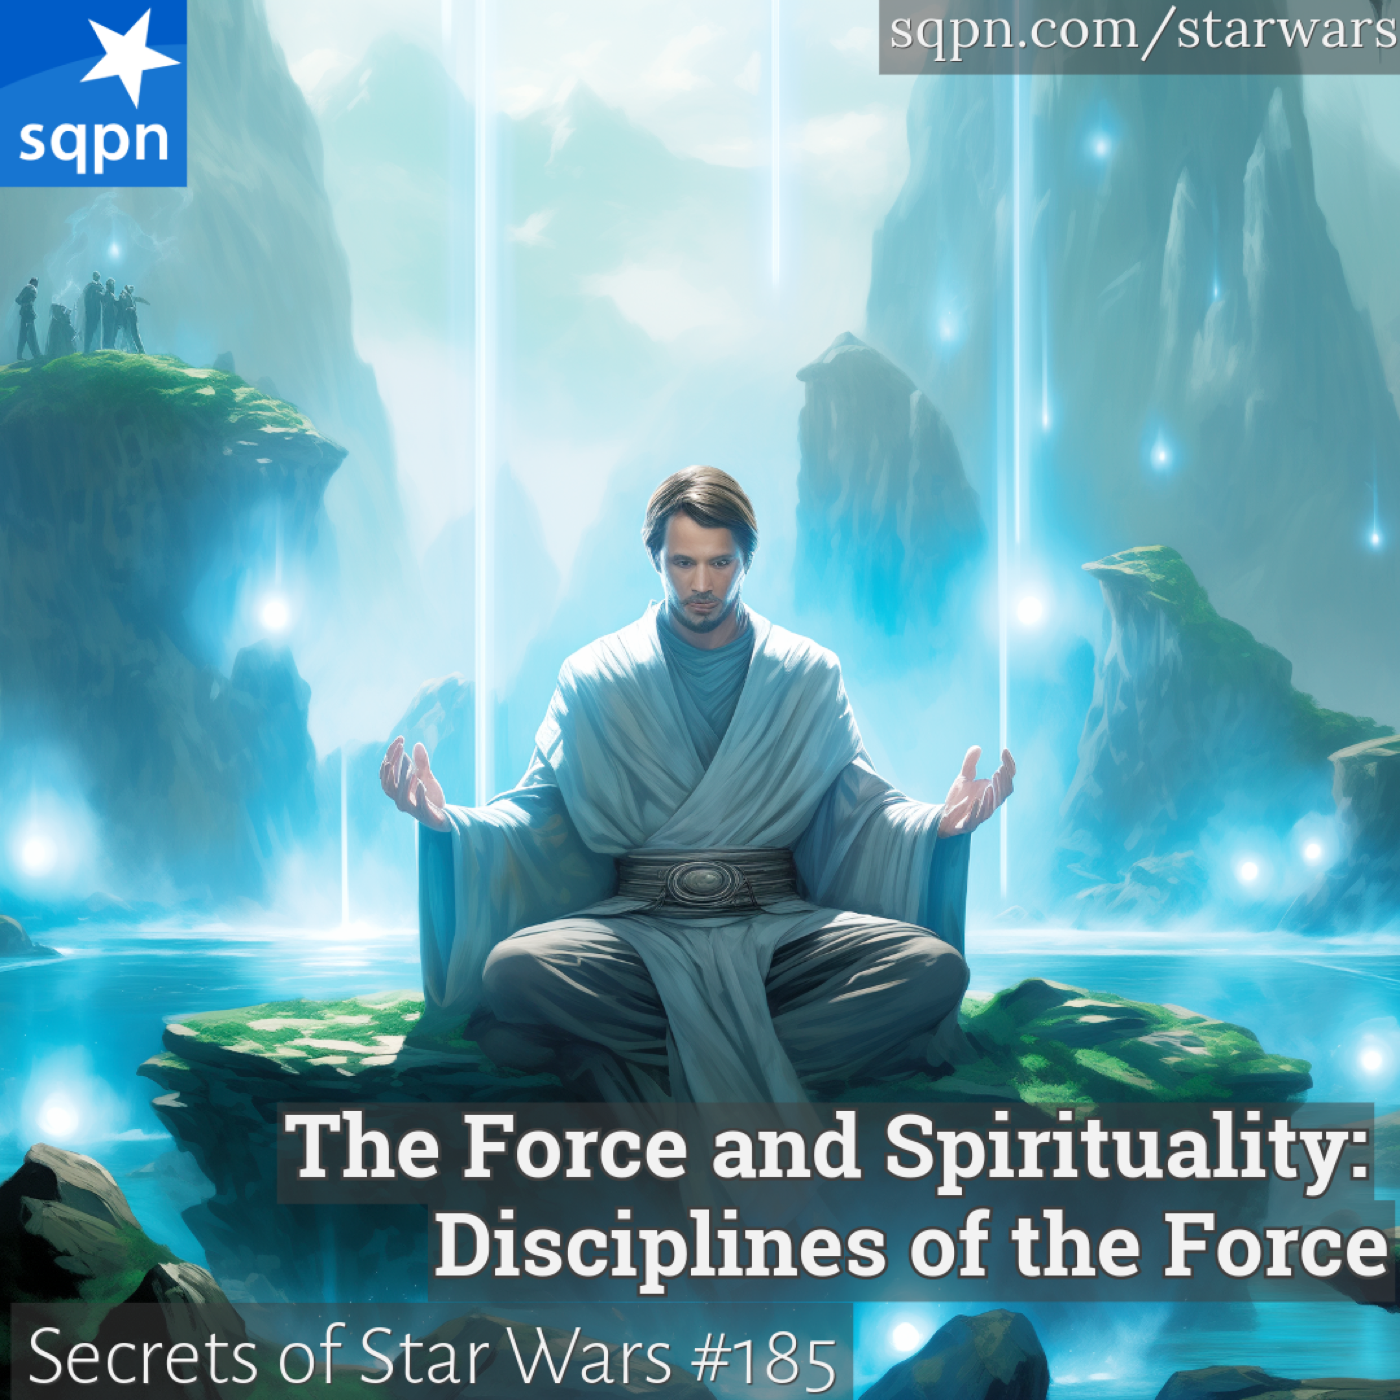 The Force and Spirituality: Disciplines of the Force